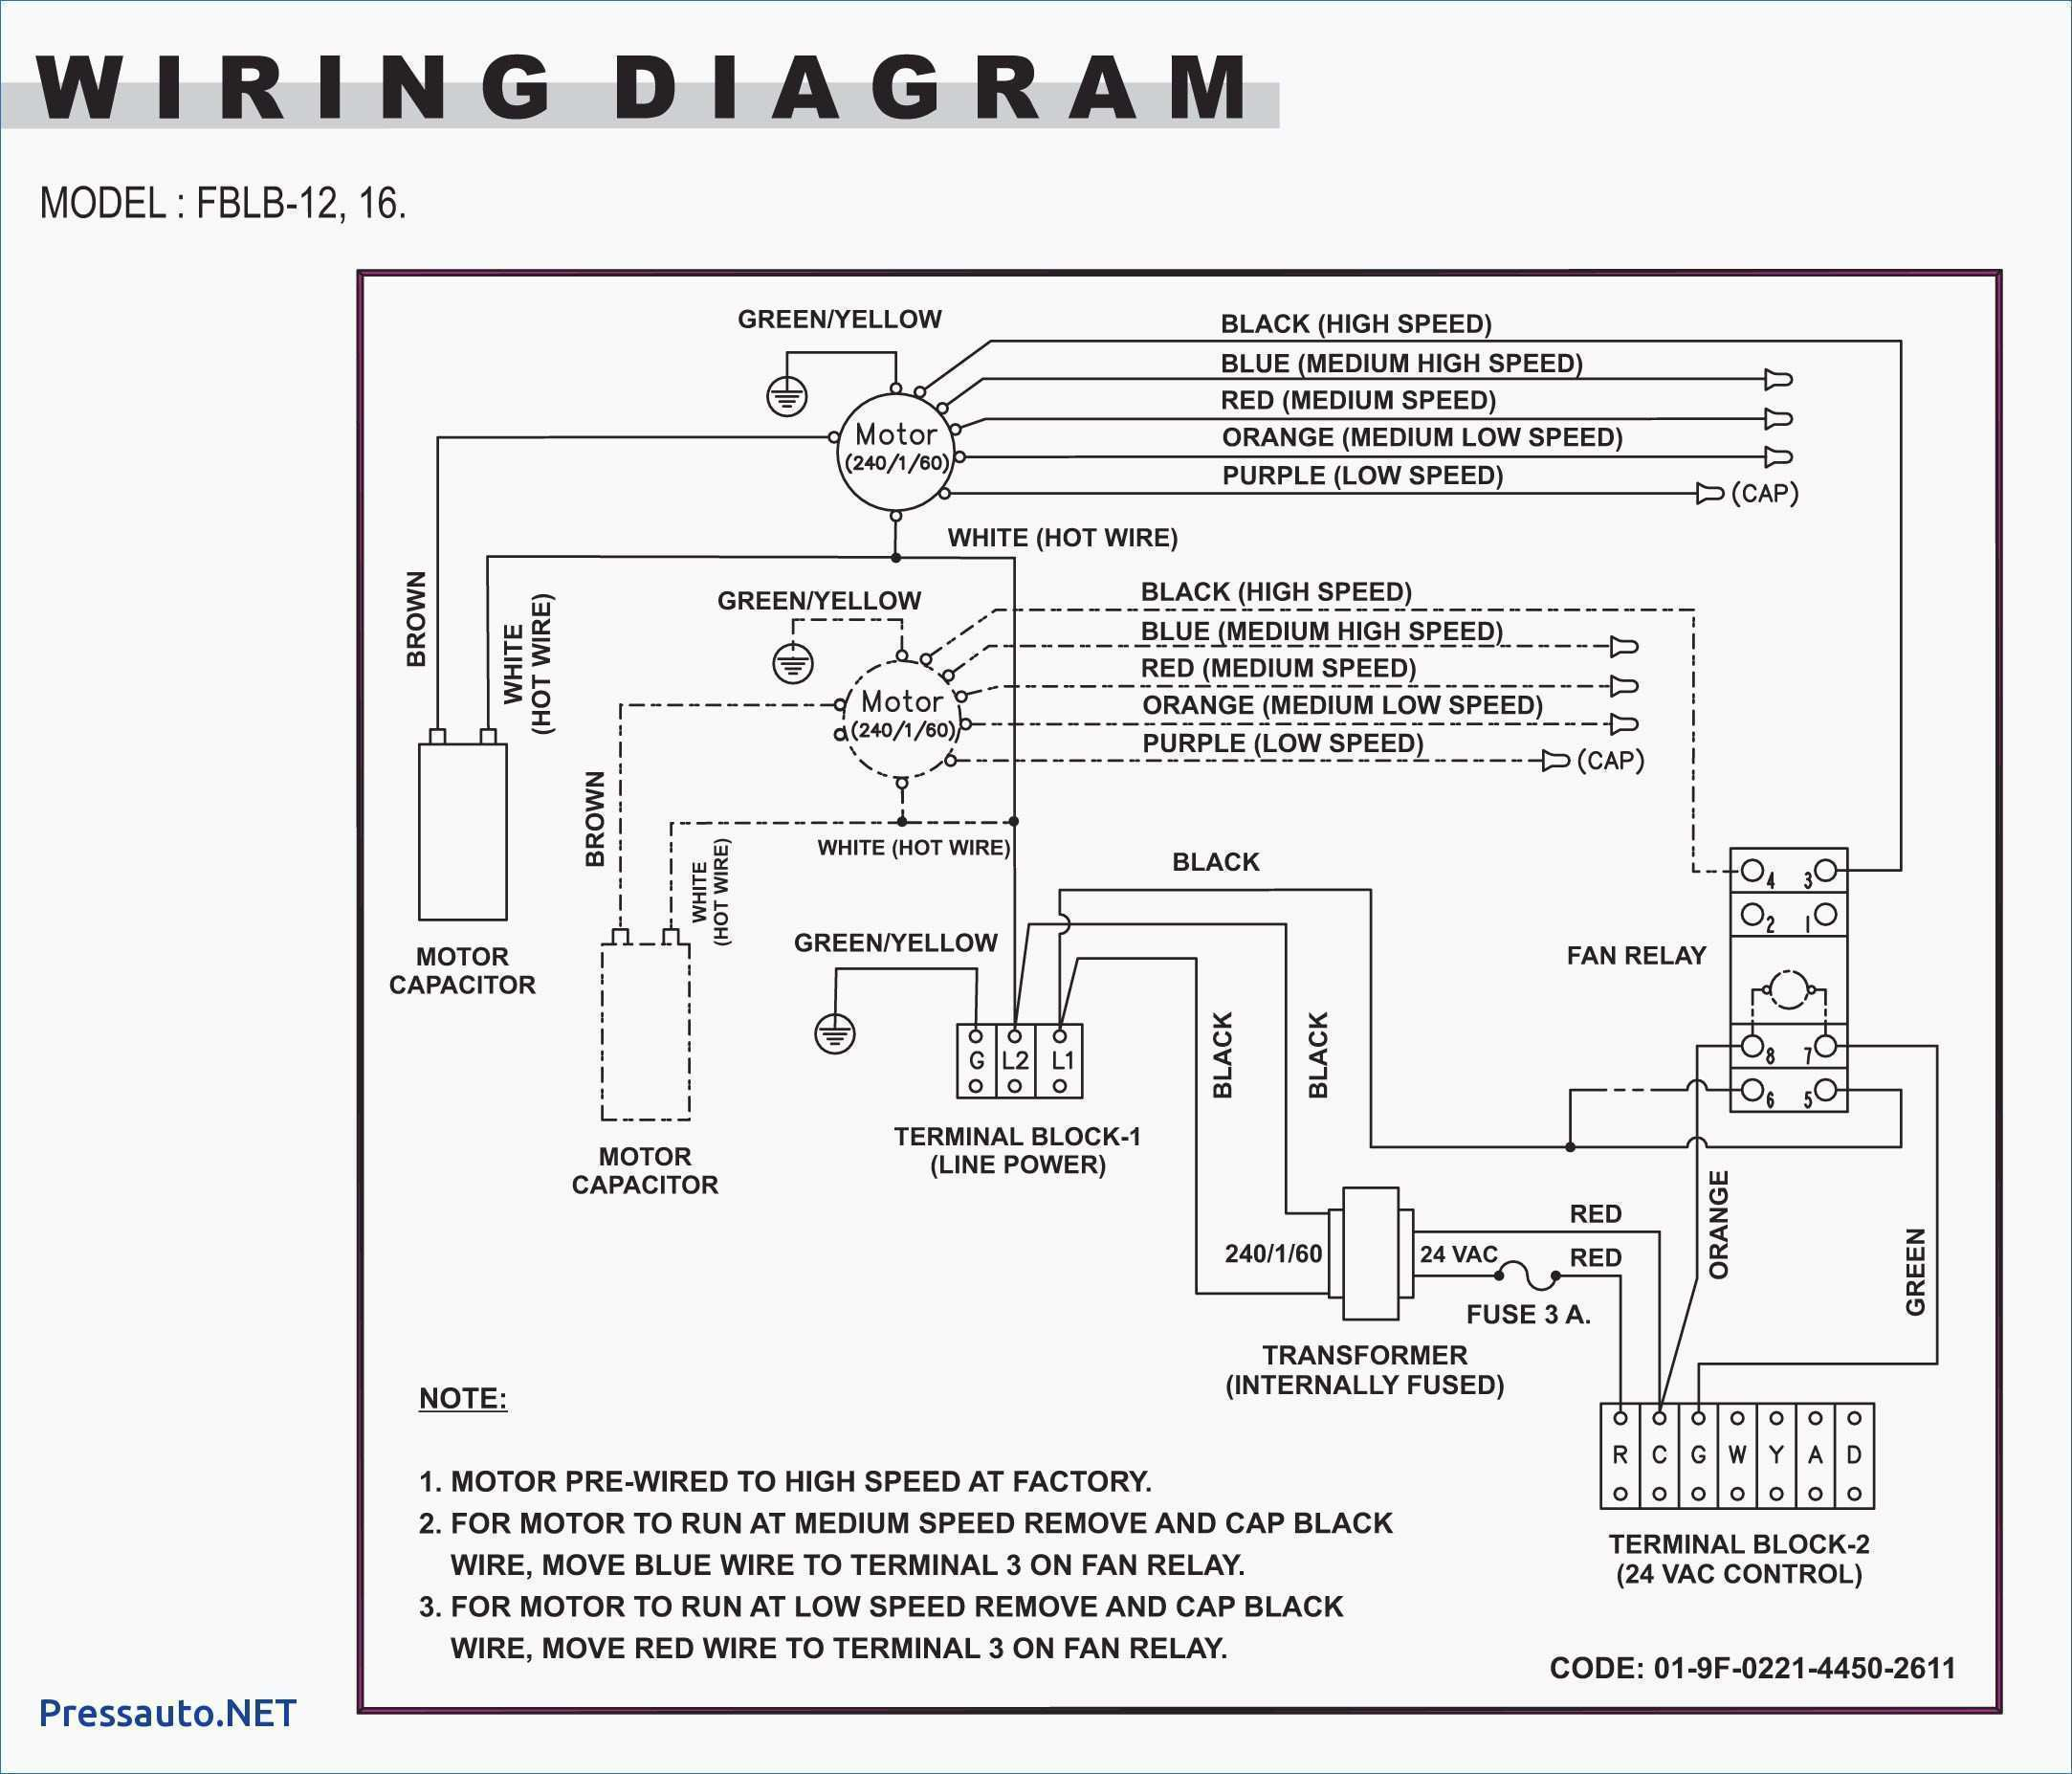 Electric Furnace Wiring Diagram 240 Volt - Auto Electrical Wiring - 240 Volt Baseboard Heater Wiring Diagram